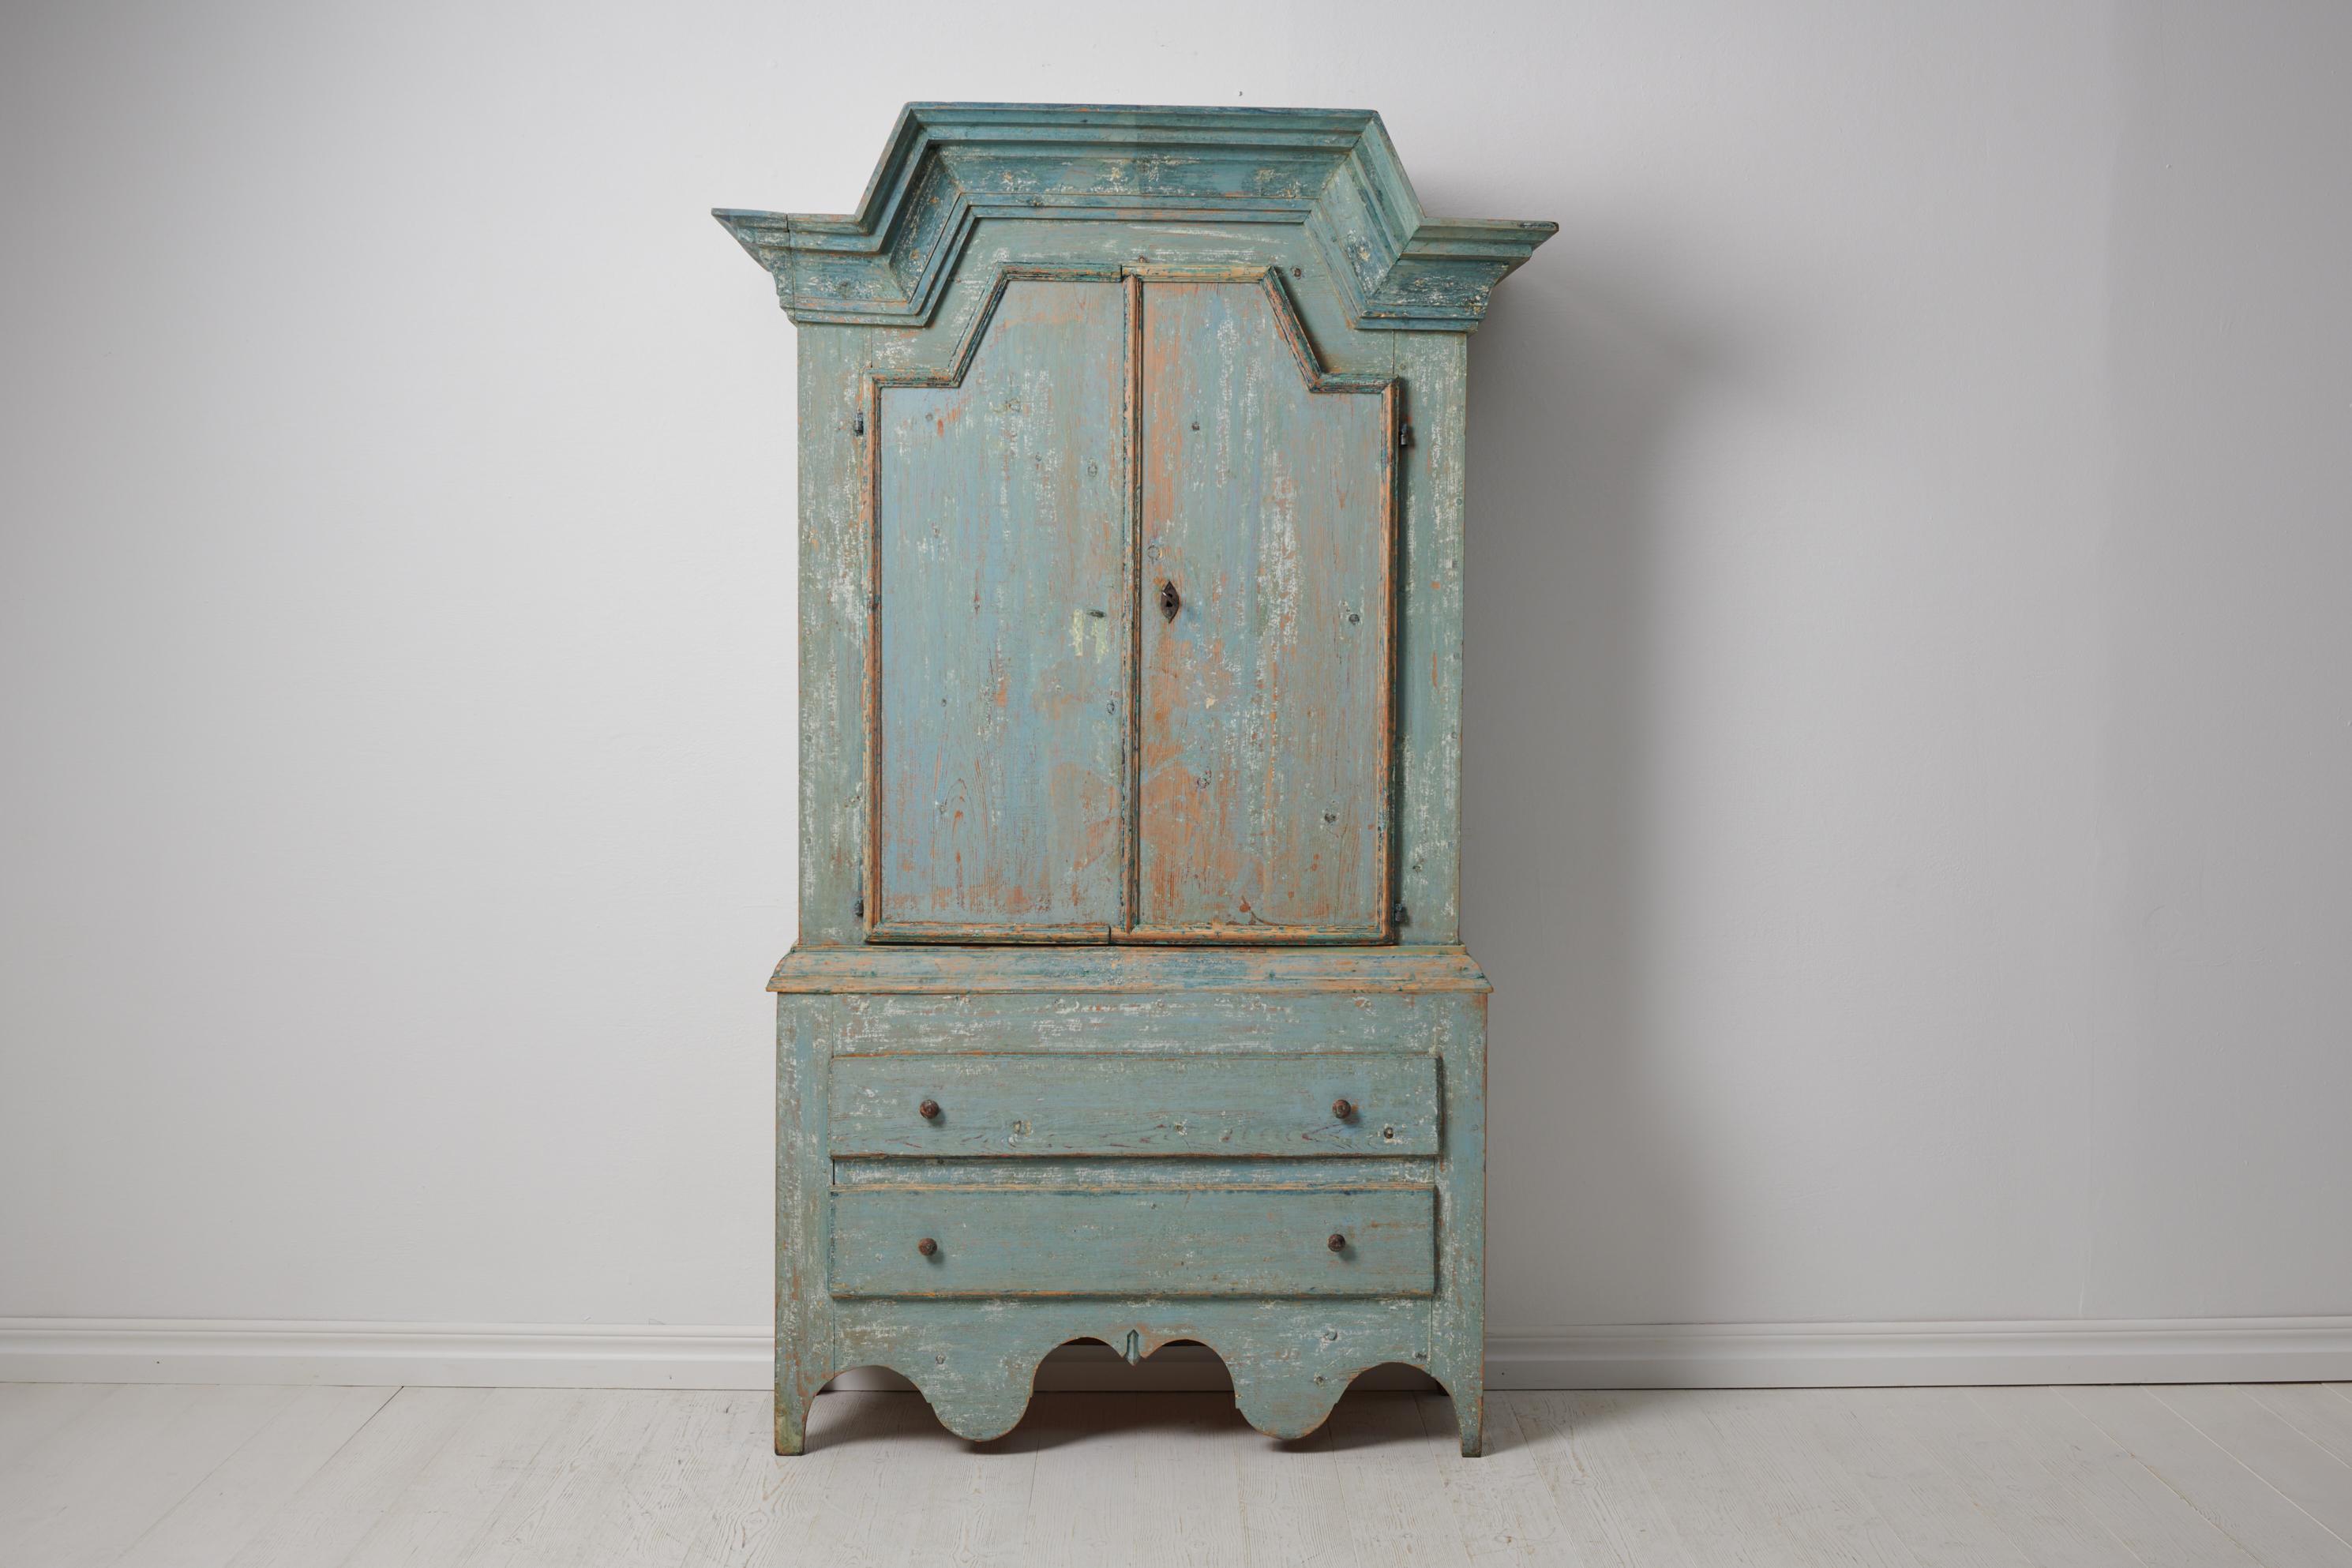 Rare Swedish blue cabinet in folk art from around 1820. This type of cabinet was only made and can only be found the county Jämtland in northern Swedish, close to the Norwegian border. Today the area is most known for its ski resorts, most notably